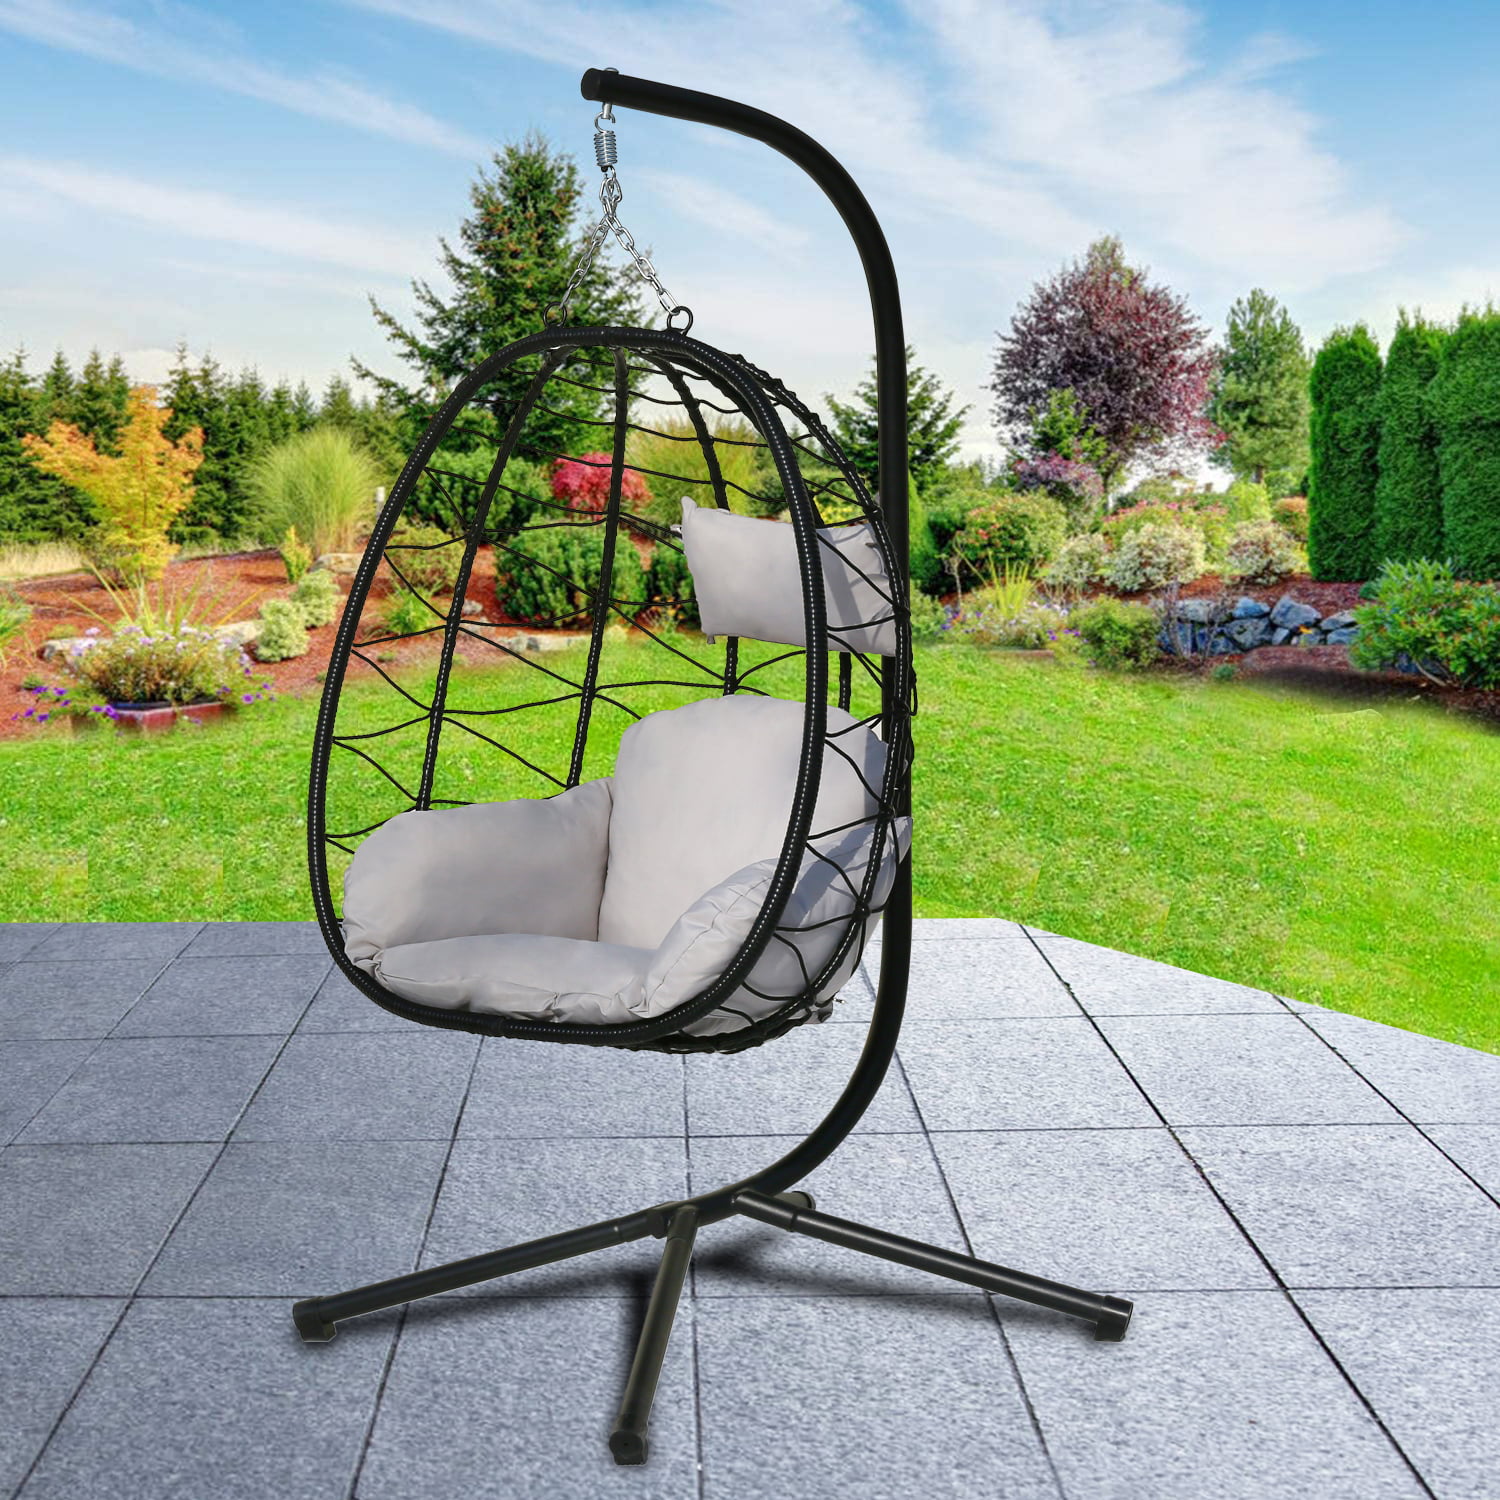 Outdoor Swinging Egg Chair, Patio Wicker Hanging Chairs